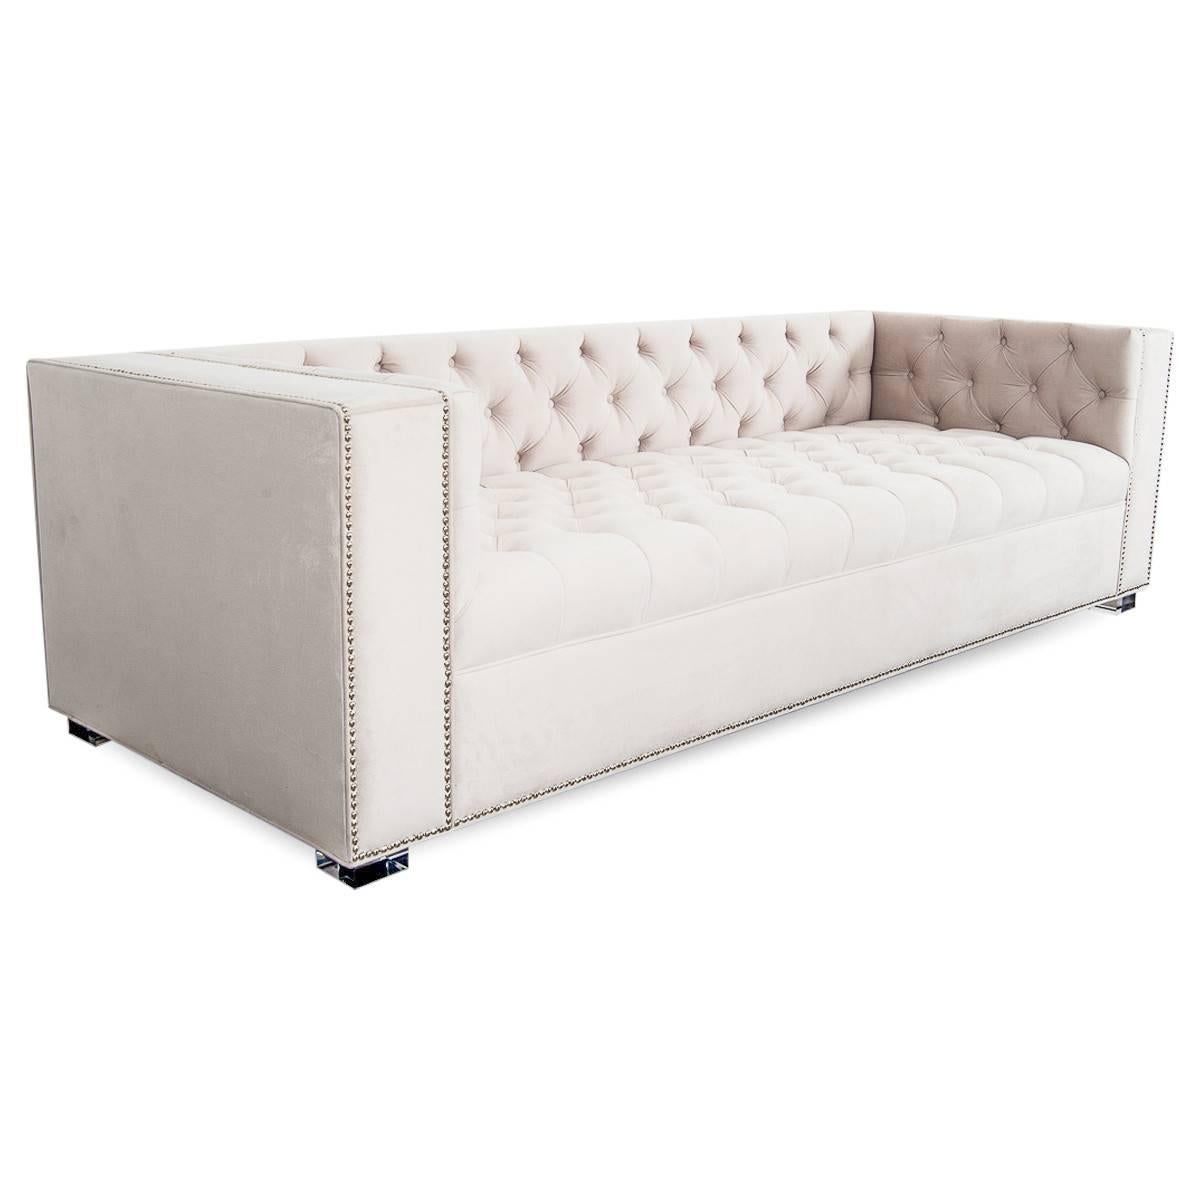 Beautifully simple lines and tufted detail combine to create this elegant sofa. Finished here in a light belvedere beach velvet, chrome nailheads and 2